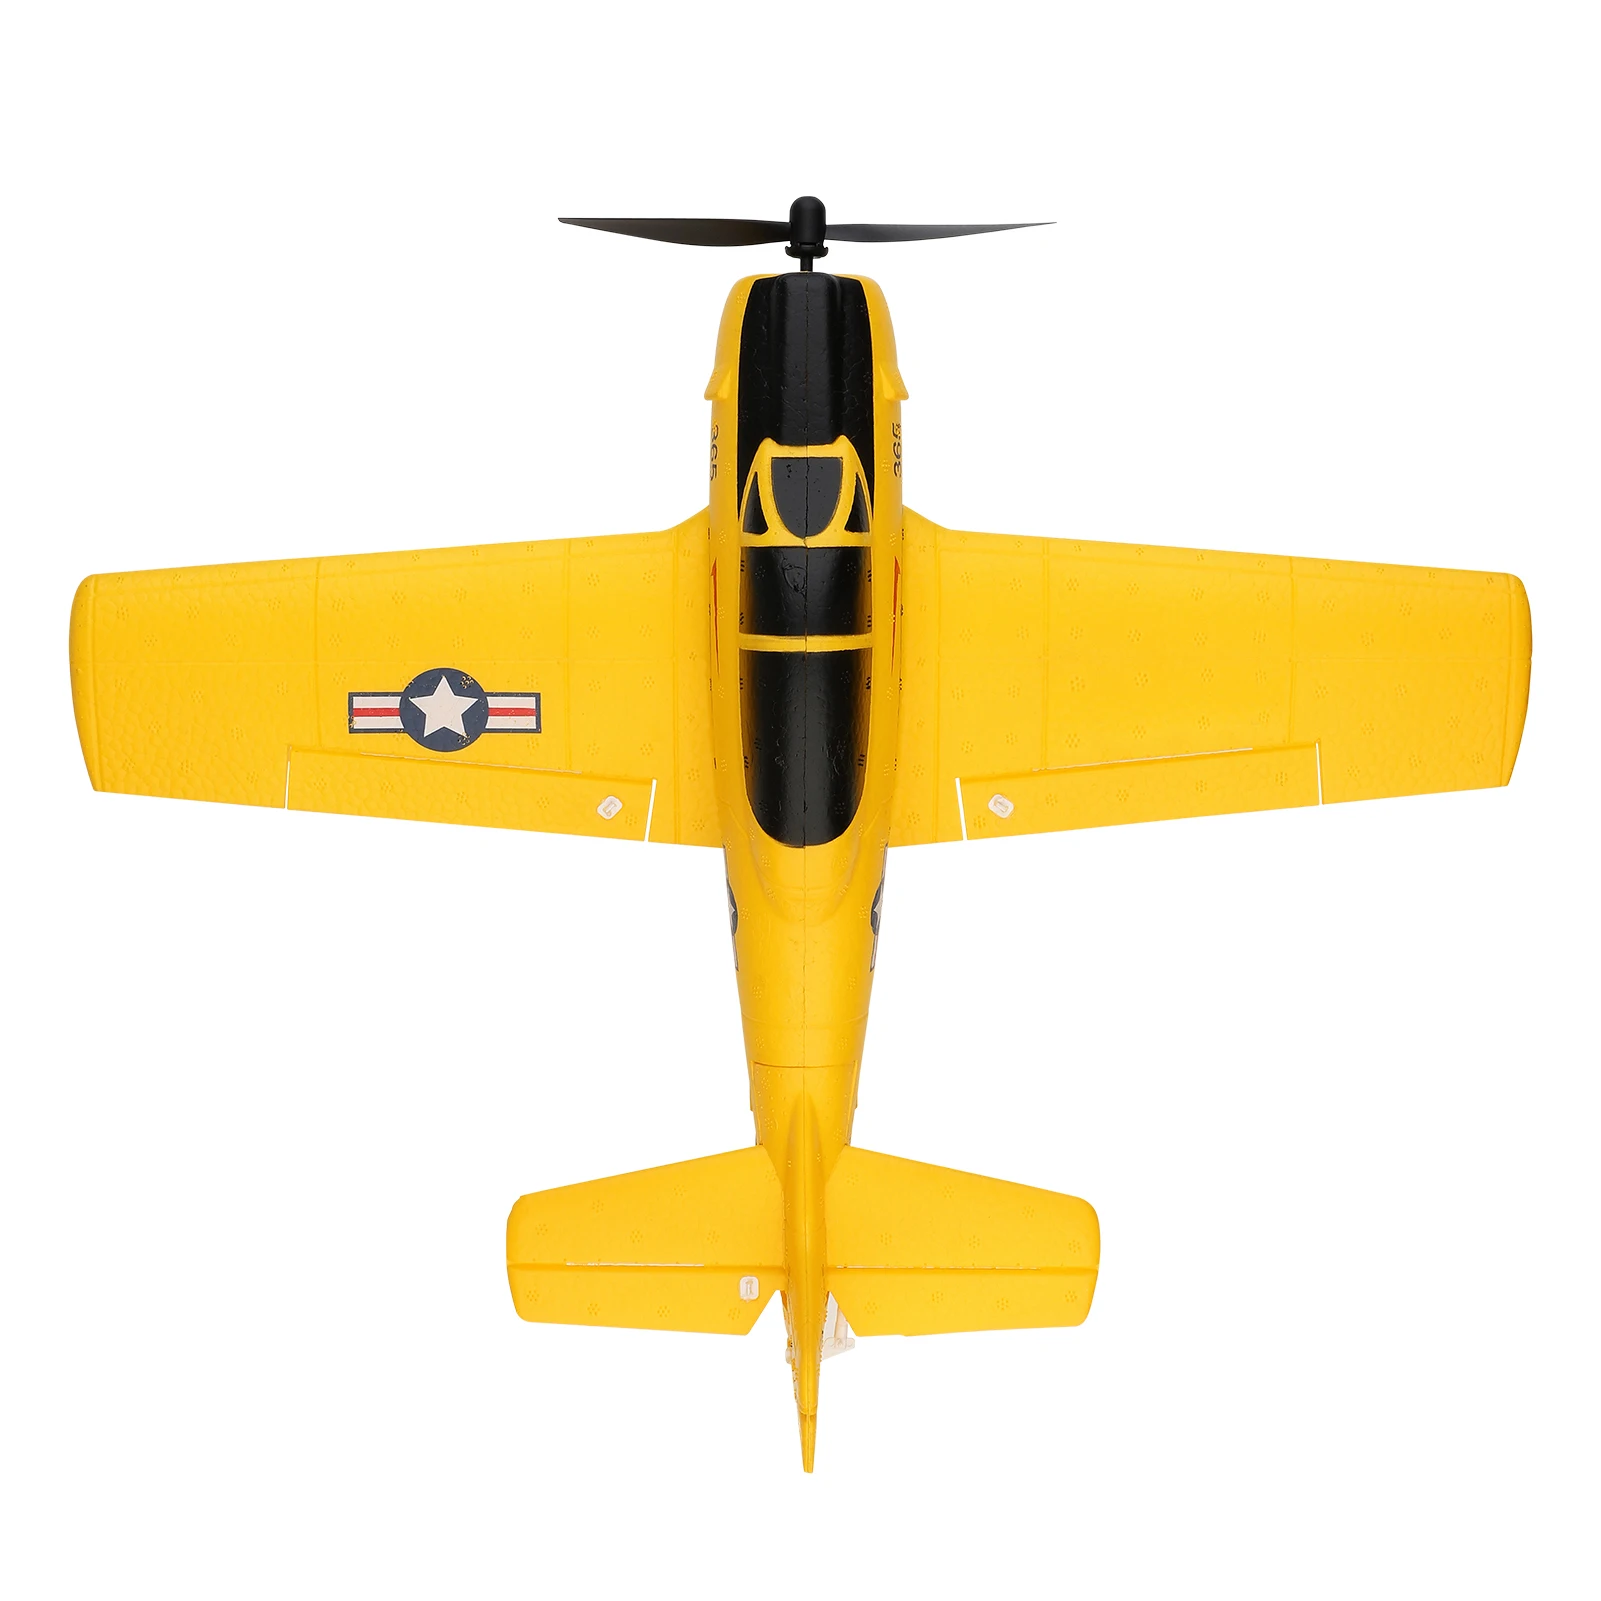 

HOSHI Wltoys A210 T28 A210-T28 4CH 384 Wingspan 6G/3D Model Airplane Six Axis Remote Control Airplane Electric RC Aircraft New, Yellow